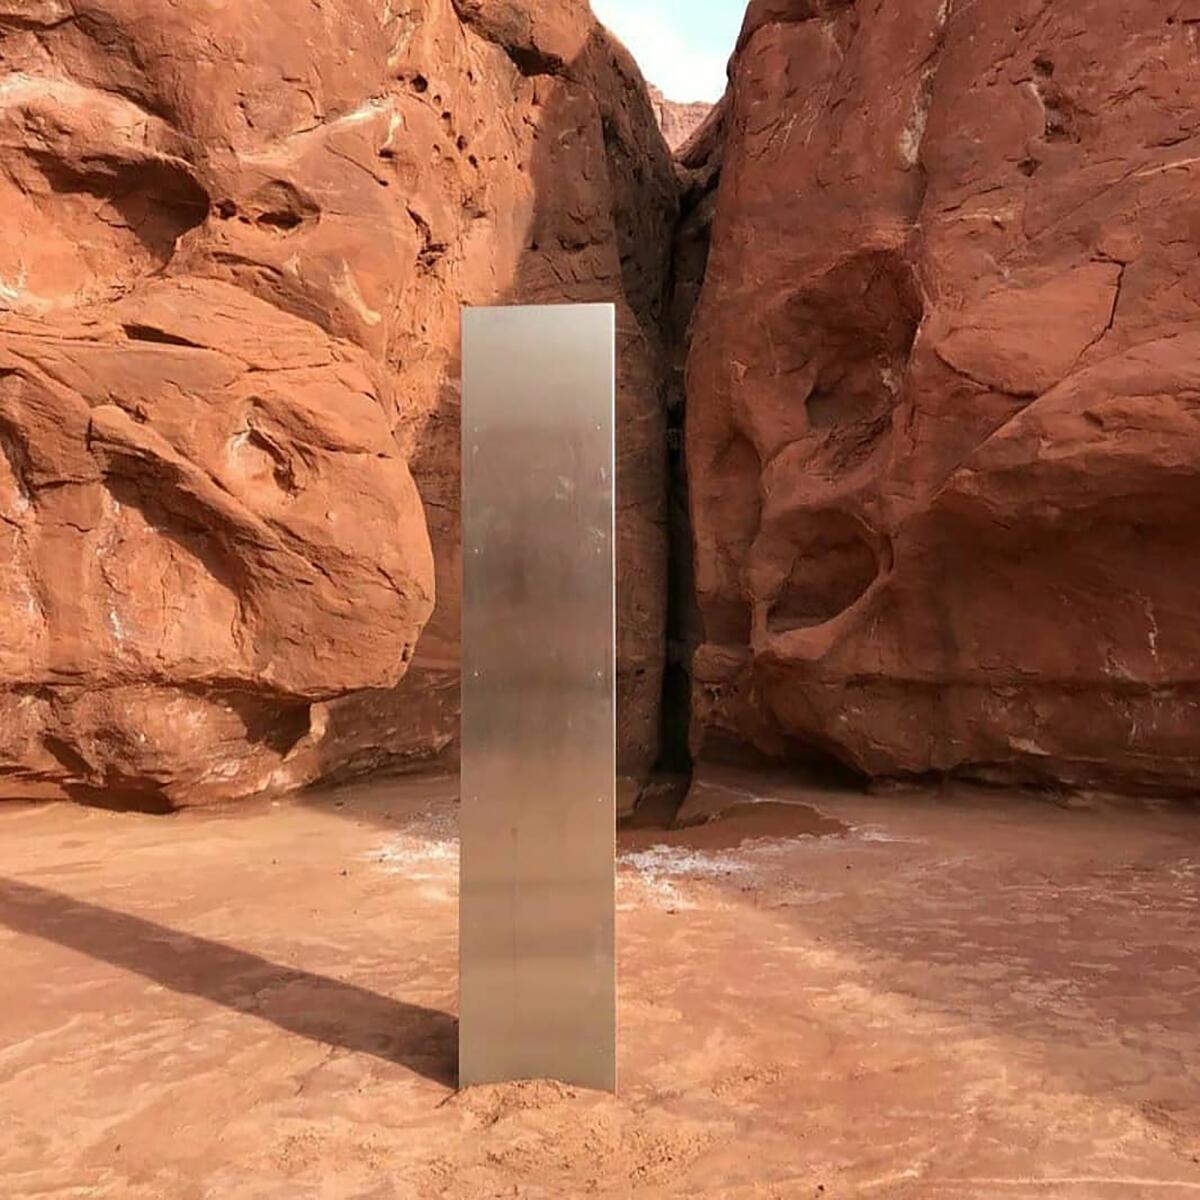 A metal monolith is installed in the ground in a remote area of red rock in Utah.